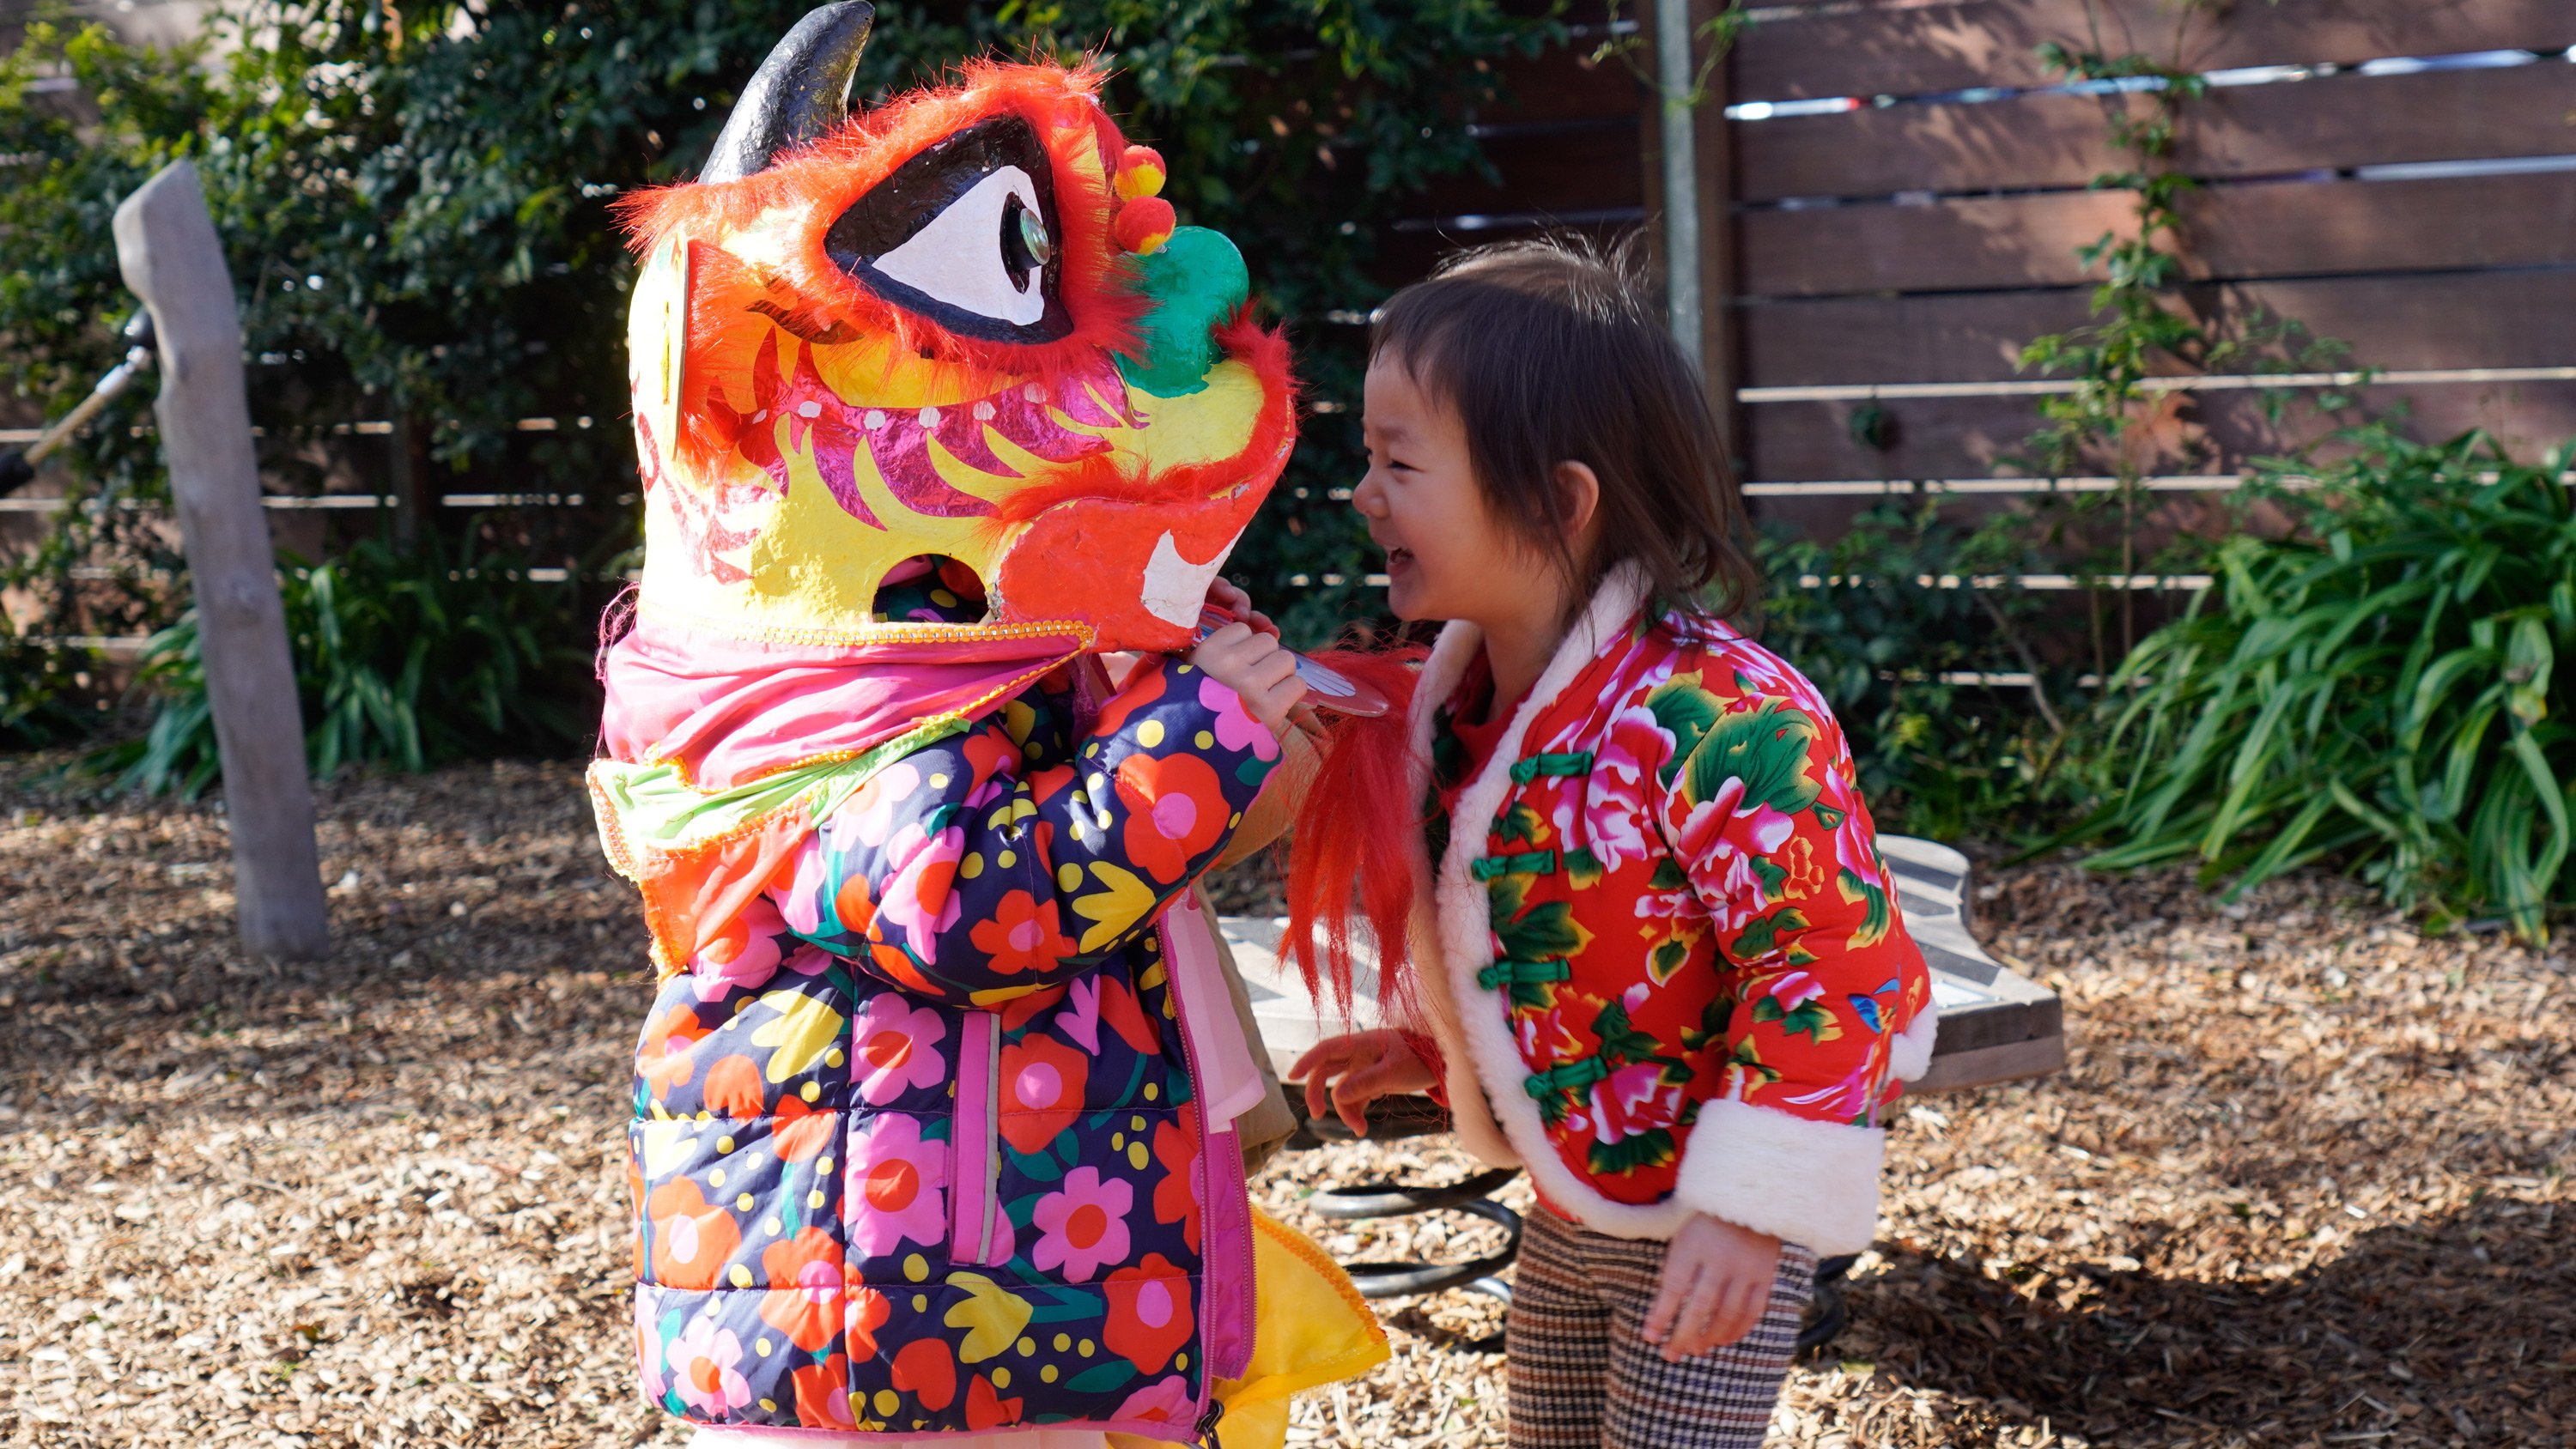 Early Years students playing with dragon masks.